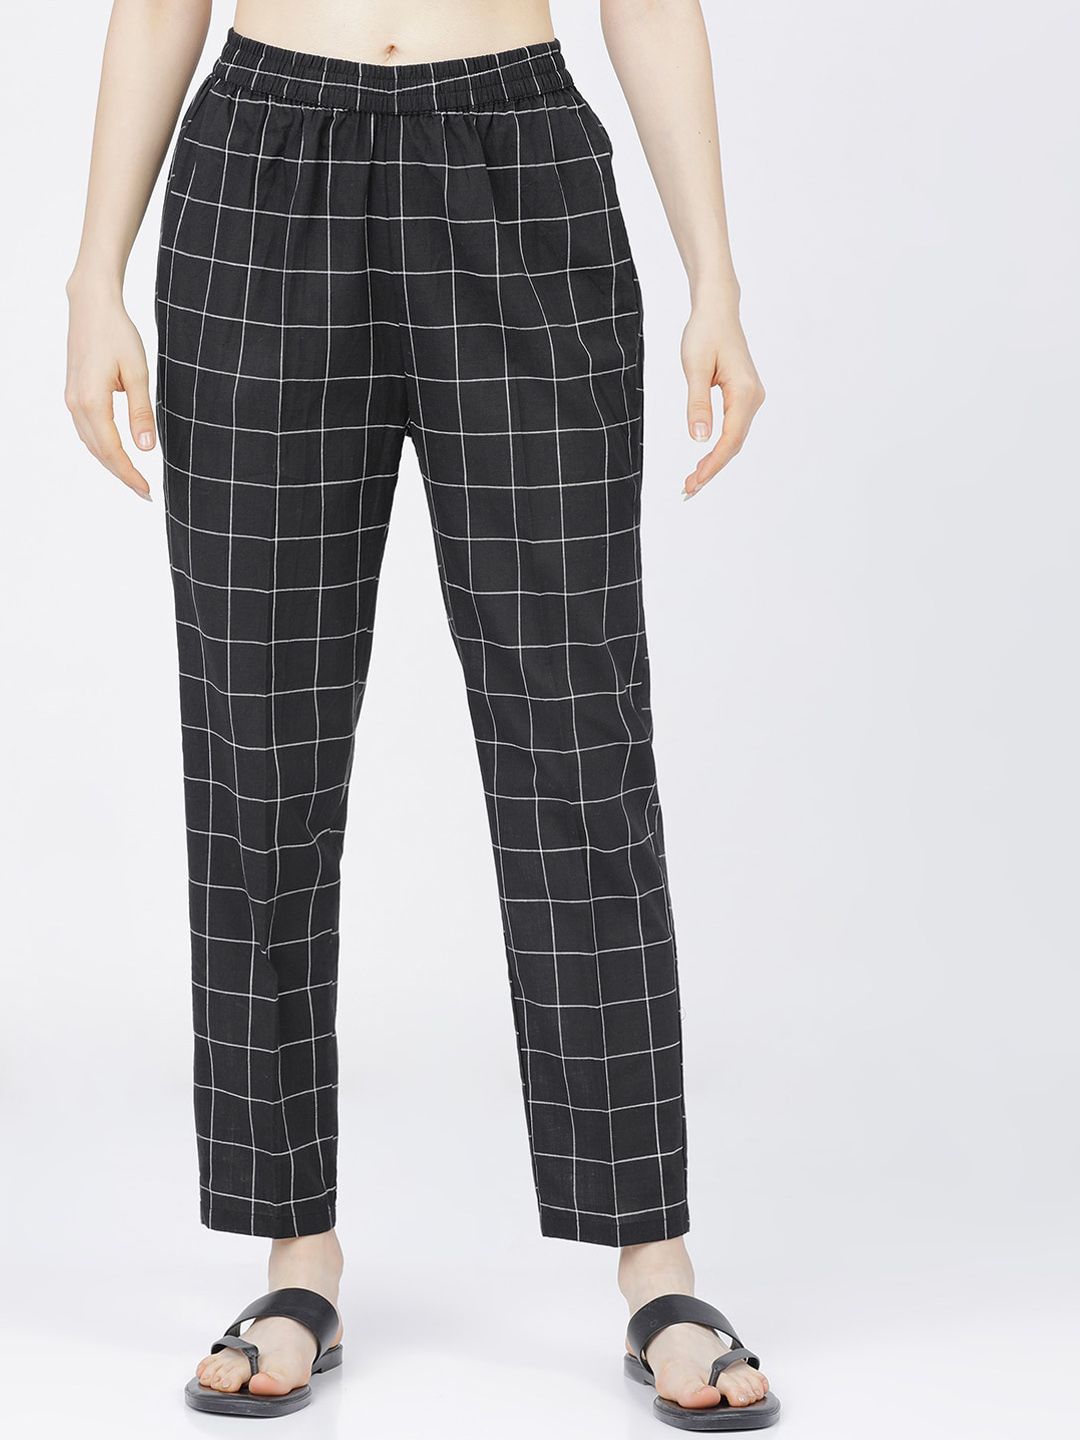 Vishudh Women Black Checked Slim Fit Trousers Price in India